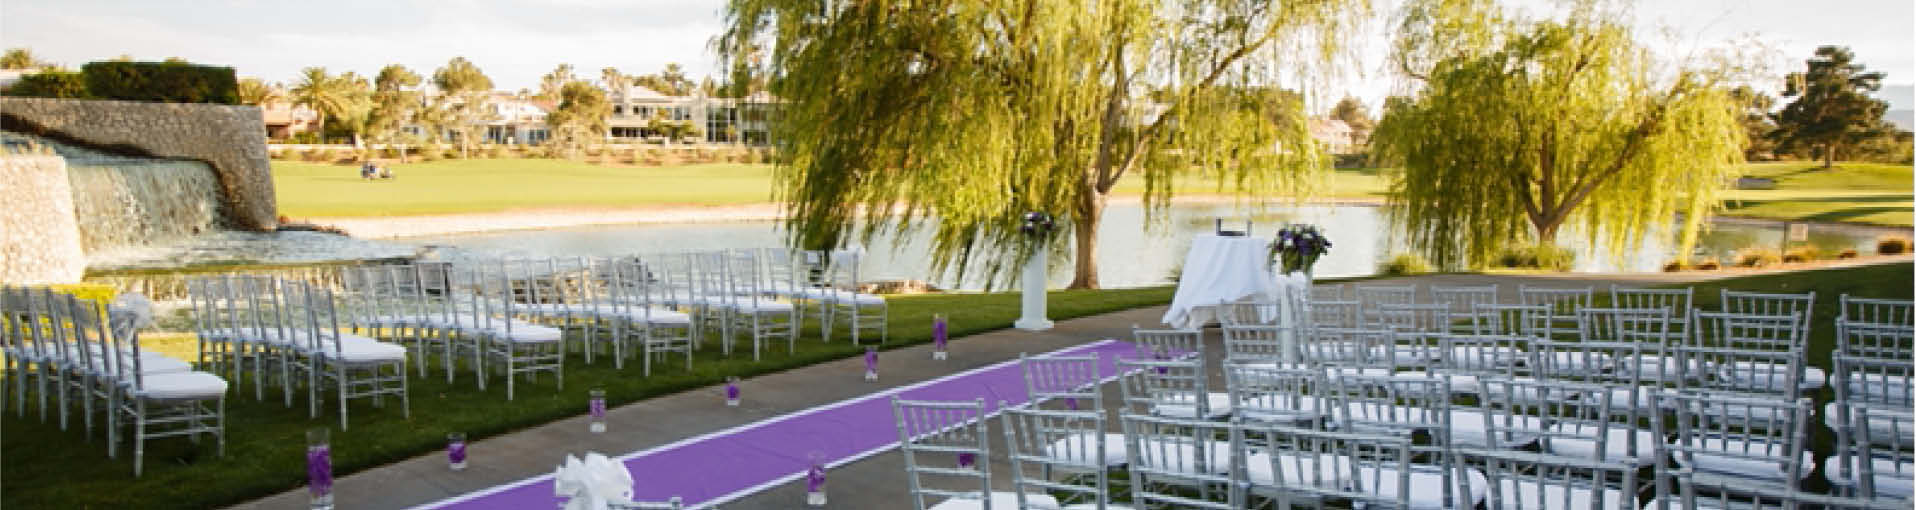 Spanish Trail Country Club Wedding Venue set up with chairs